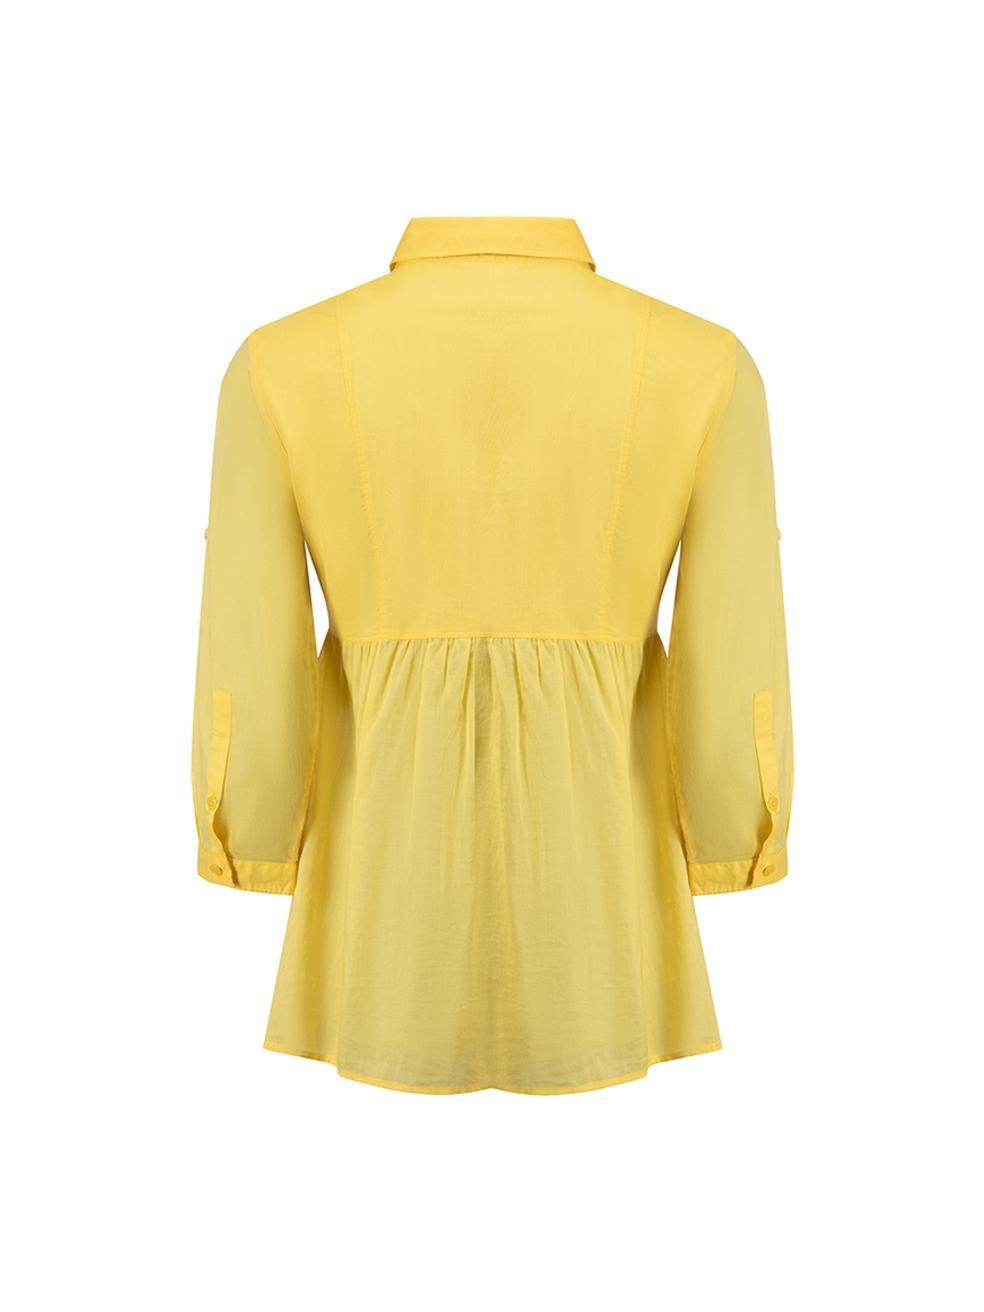 Burberry Brit Yellow 3/4 Length Sleeves Blouse Size S In Good Condition For Sale In London, GB